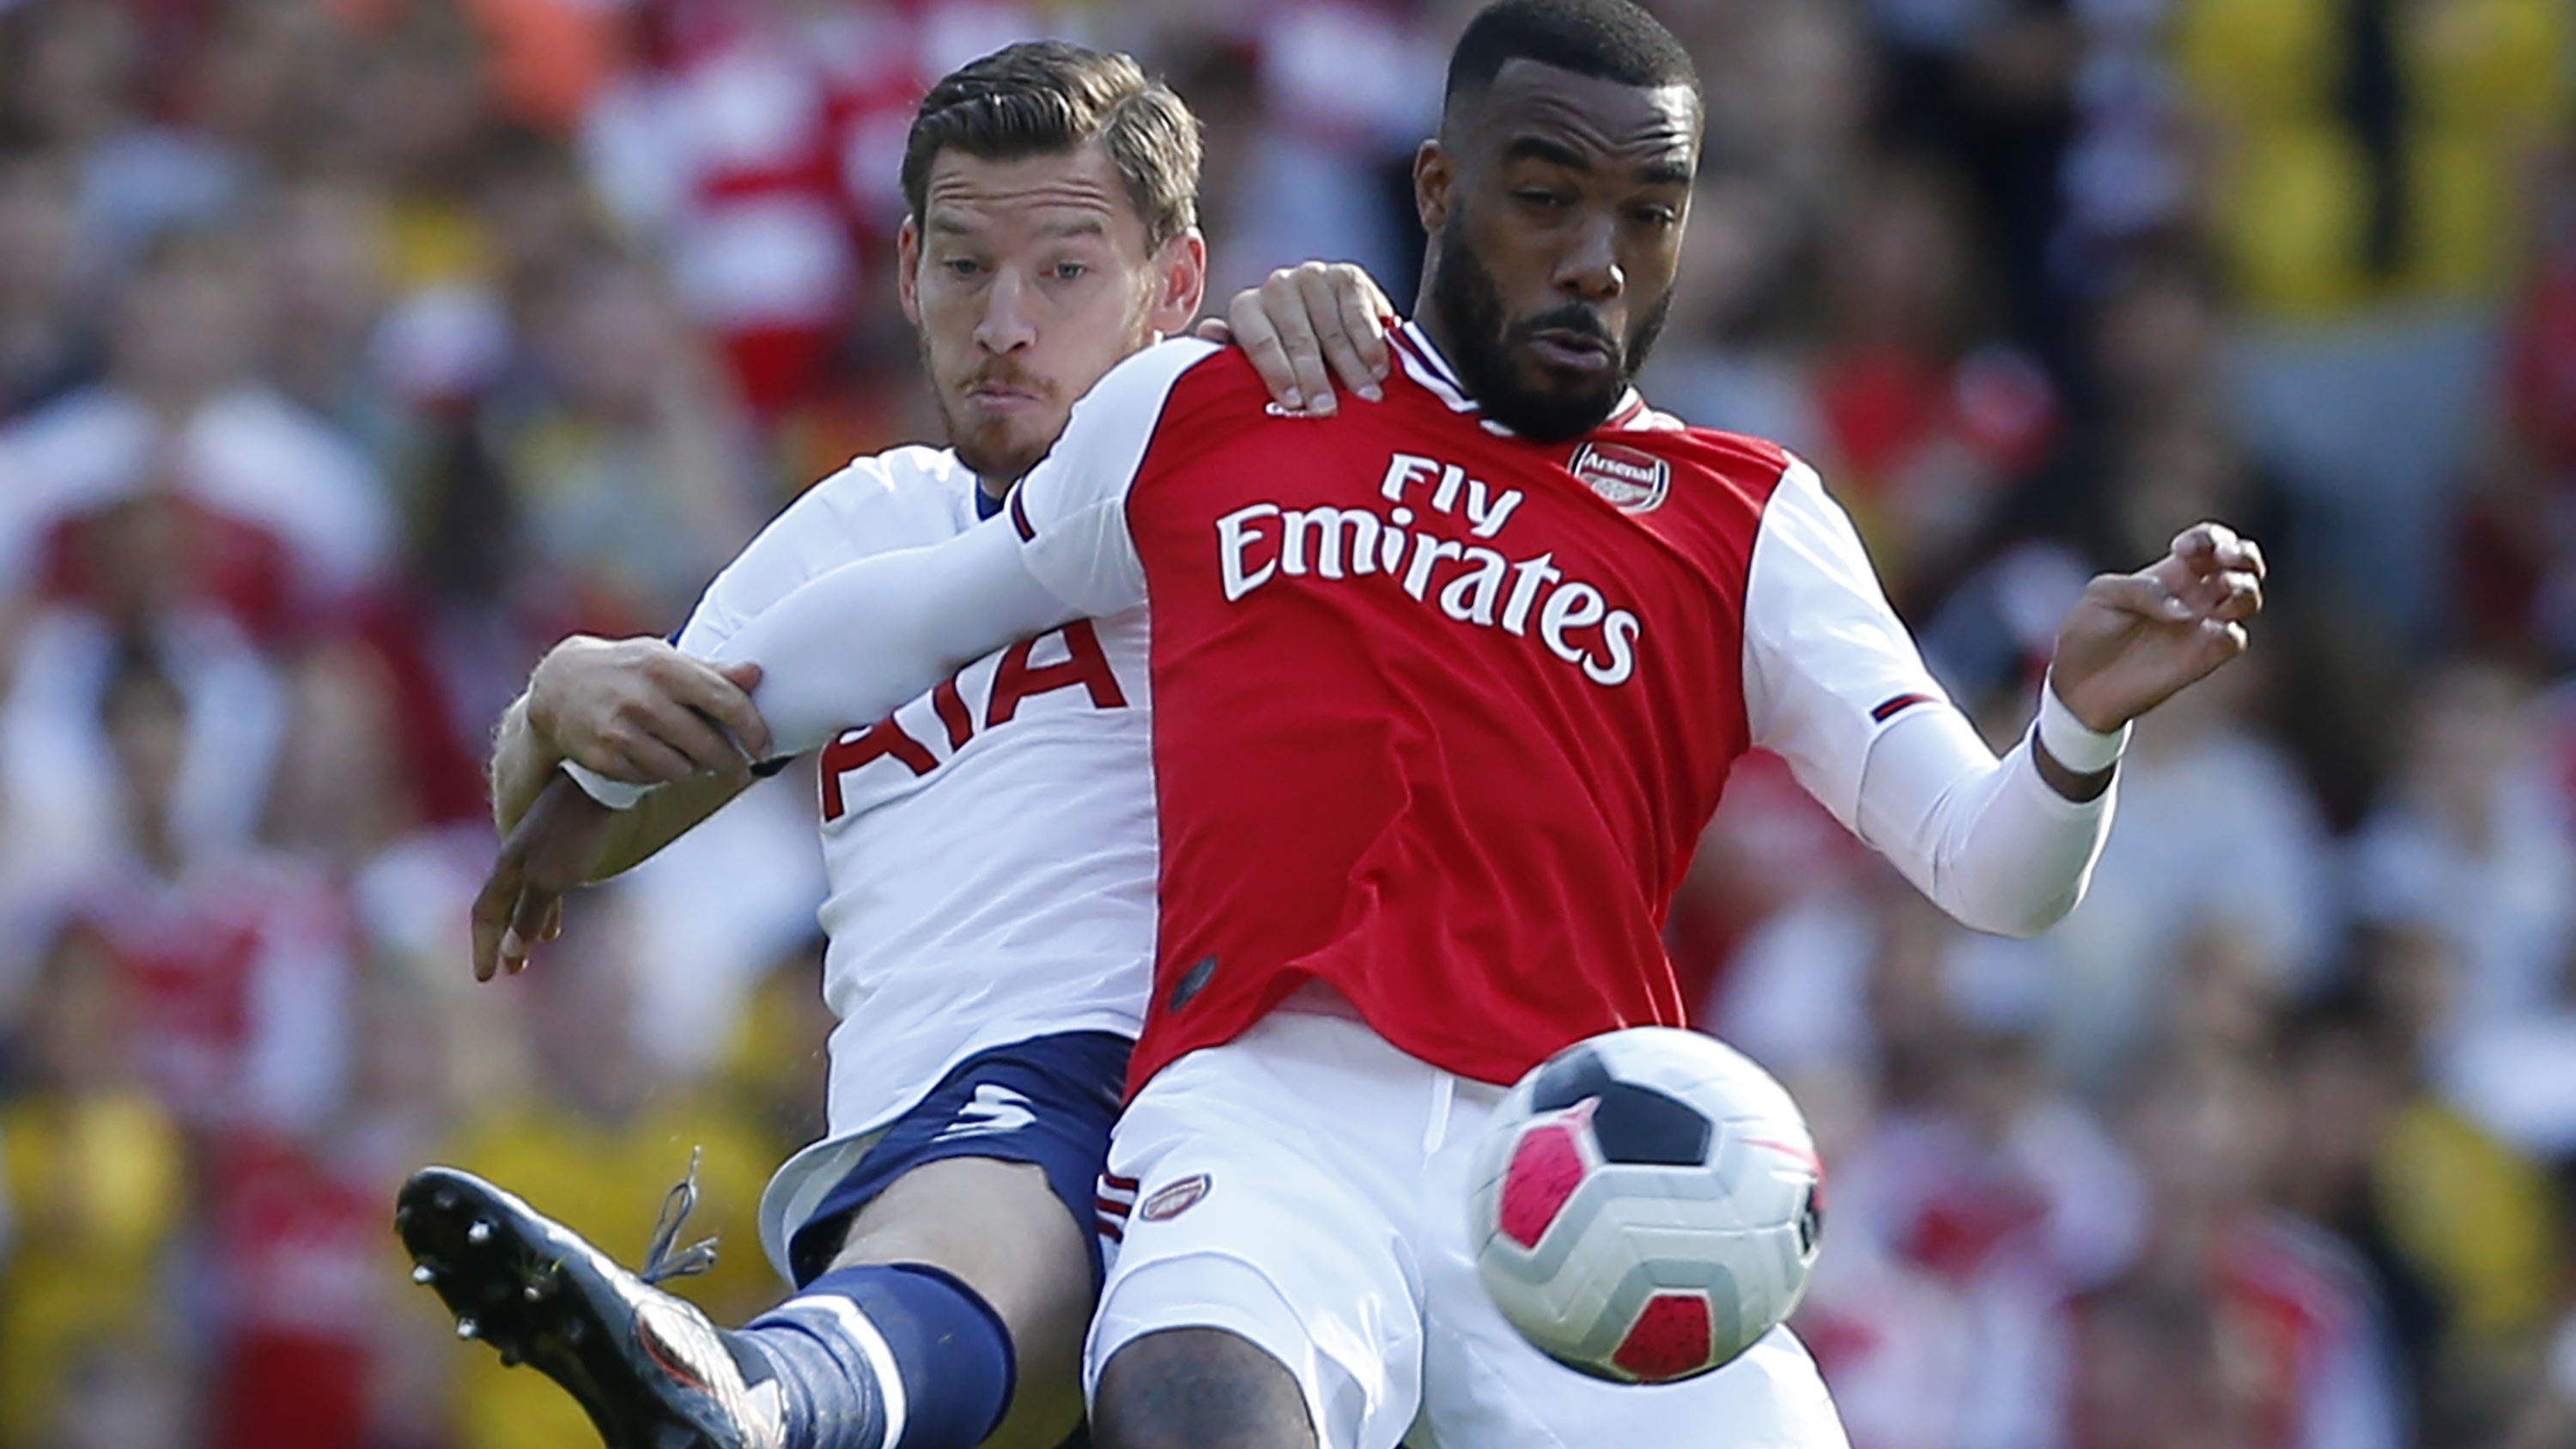 Tottenham vs Arsenal live stream, TV channels Where to watch north London derby online Toms Guide